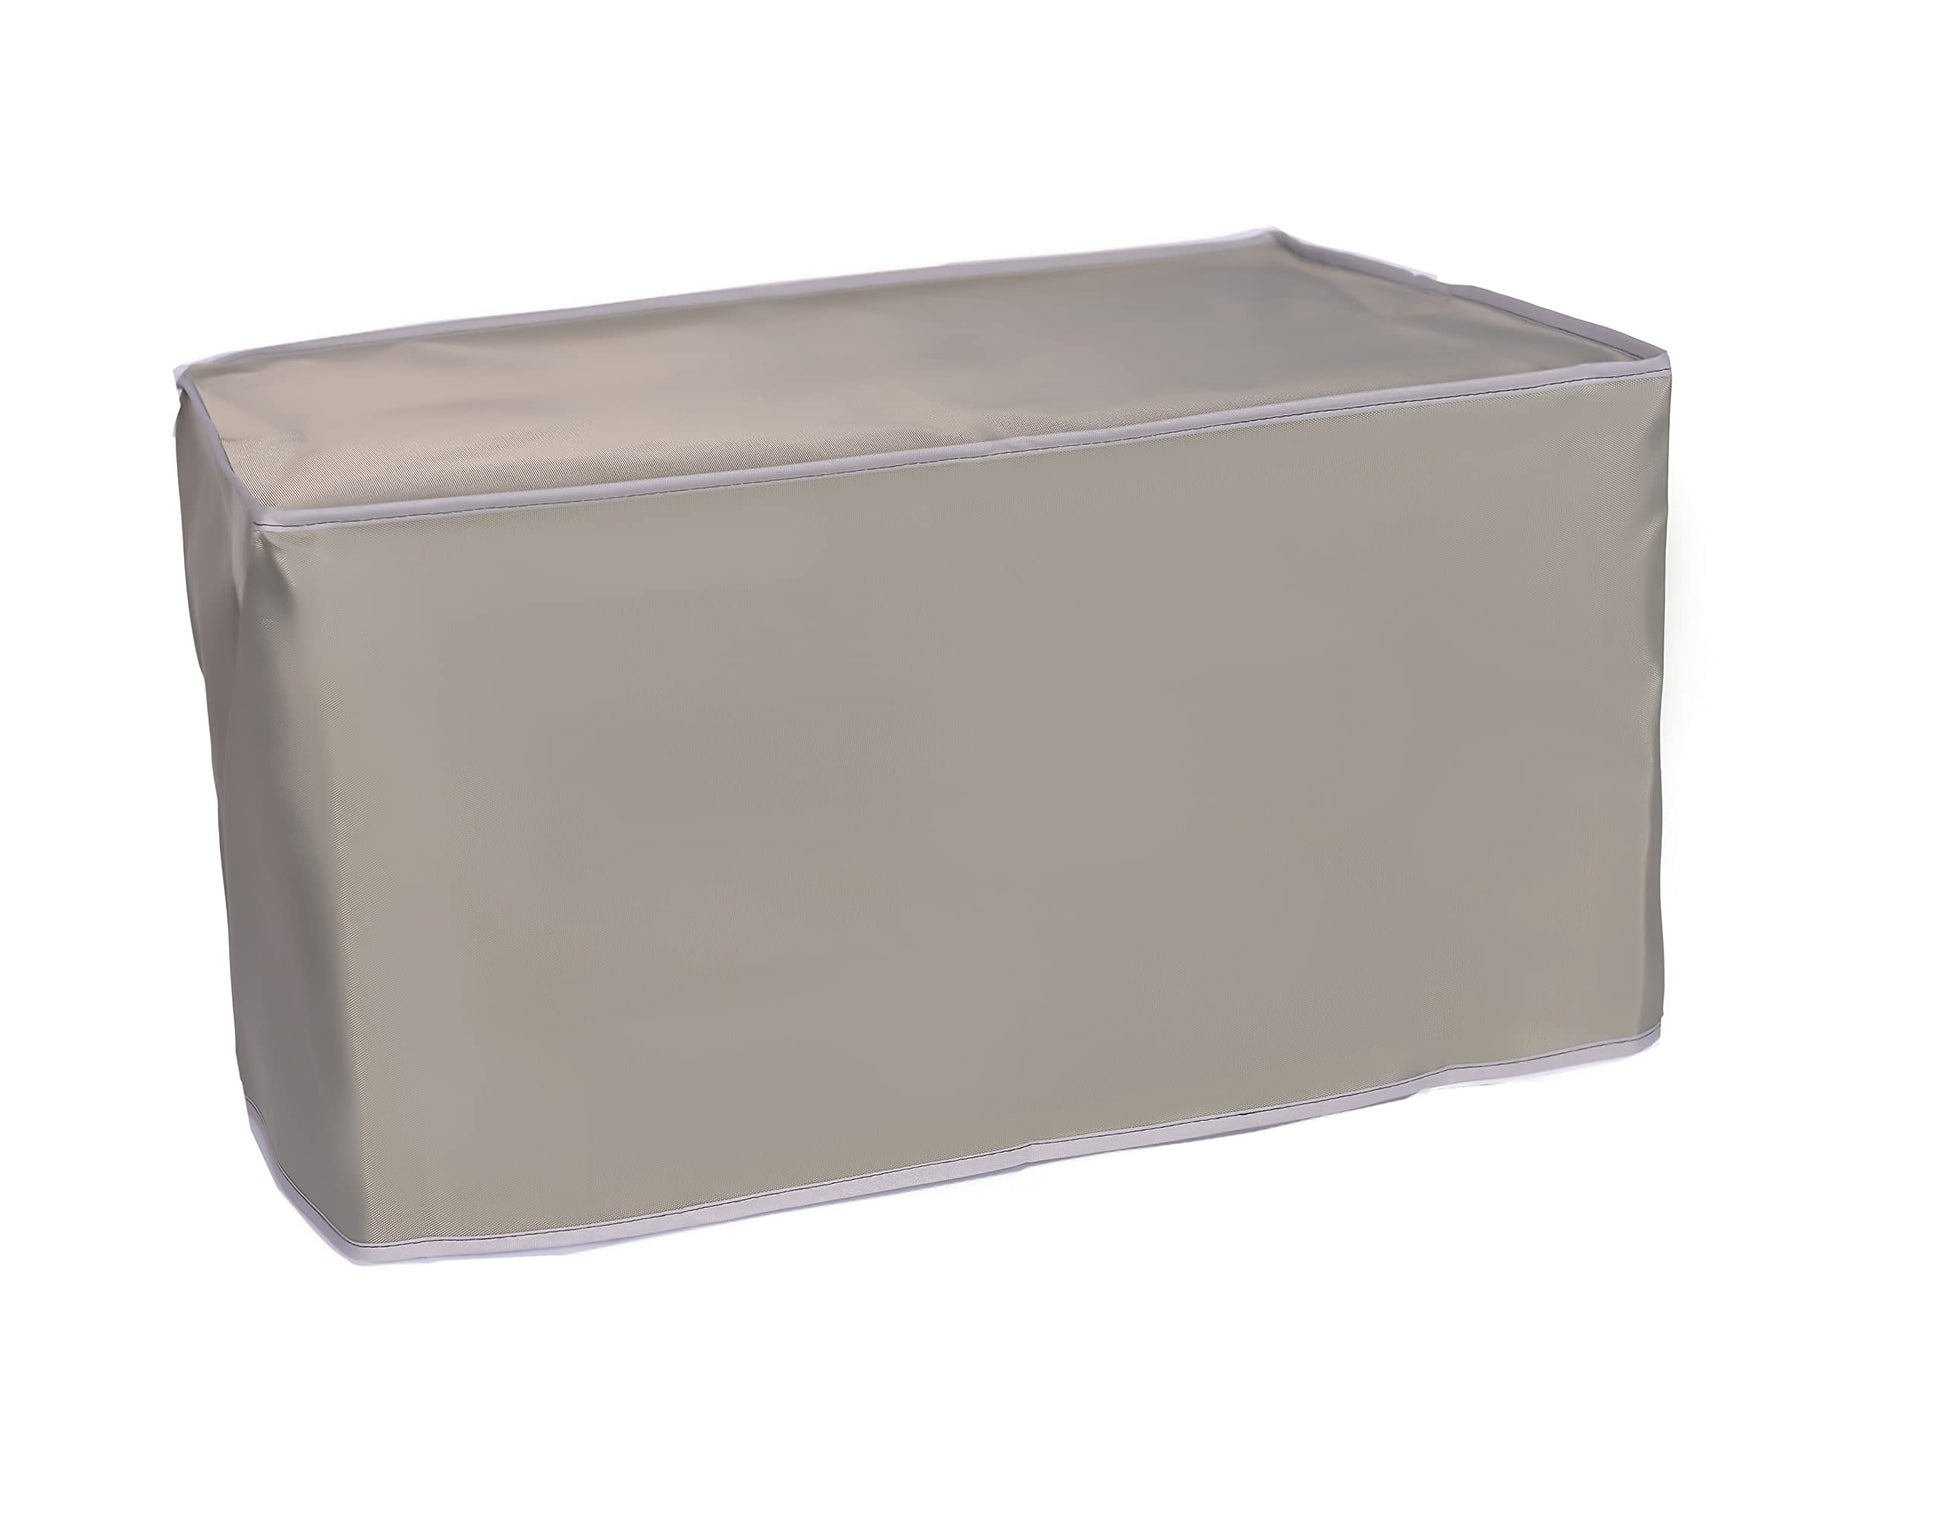 The Perfect Dust Cover, Tan Nylon Cover Compatible with Cuisinart Air